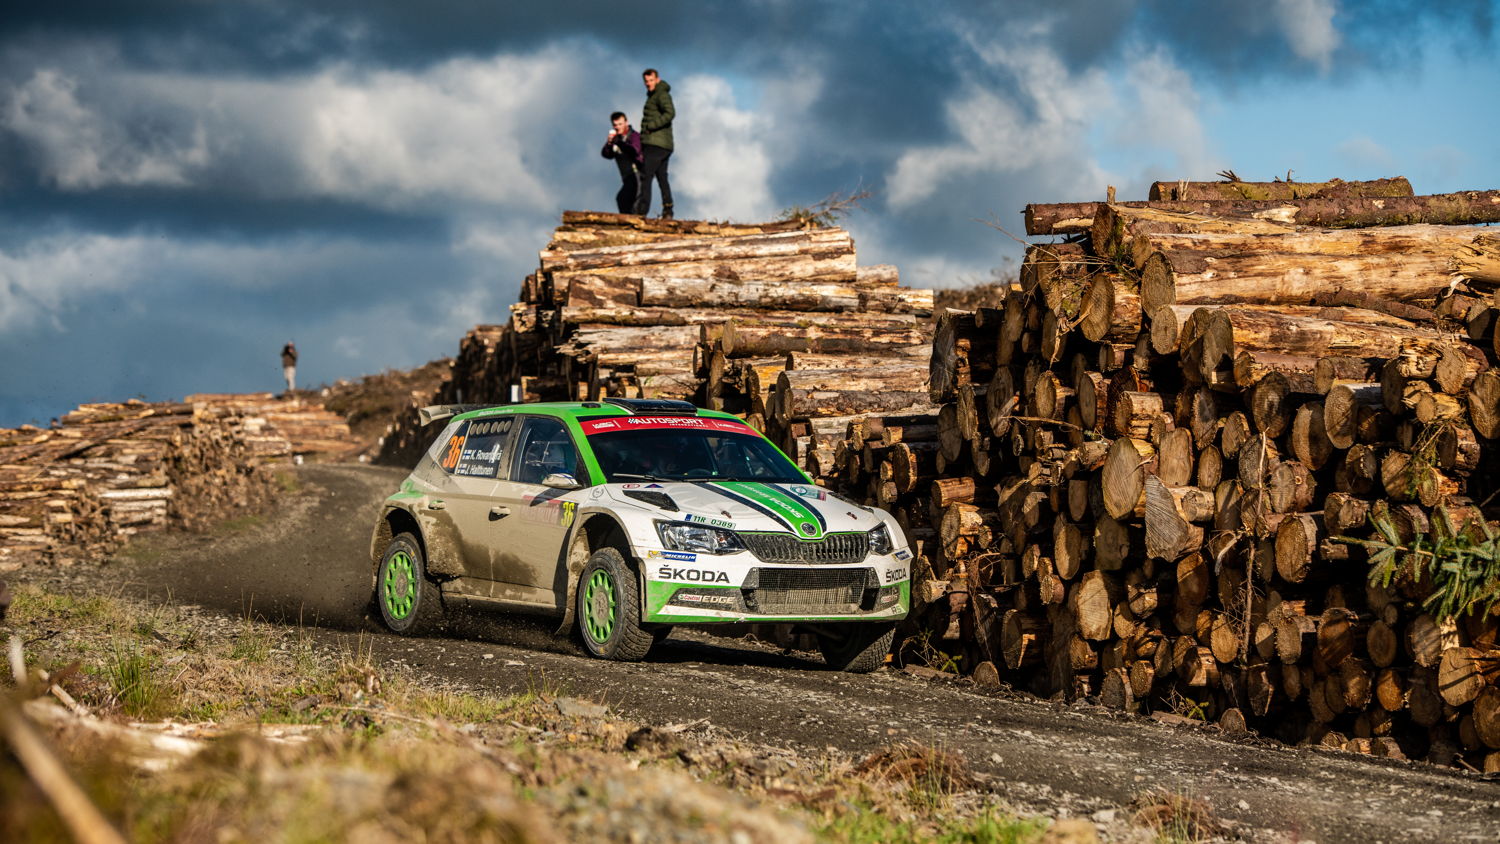 With second place, reigning WRC 2 champions Pontus Tidemand/Jonas Andersson (ŠKODA FABIA R5) secured a double win for ŠKODA in the WRC 2 category